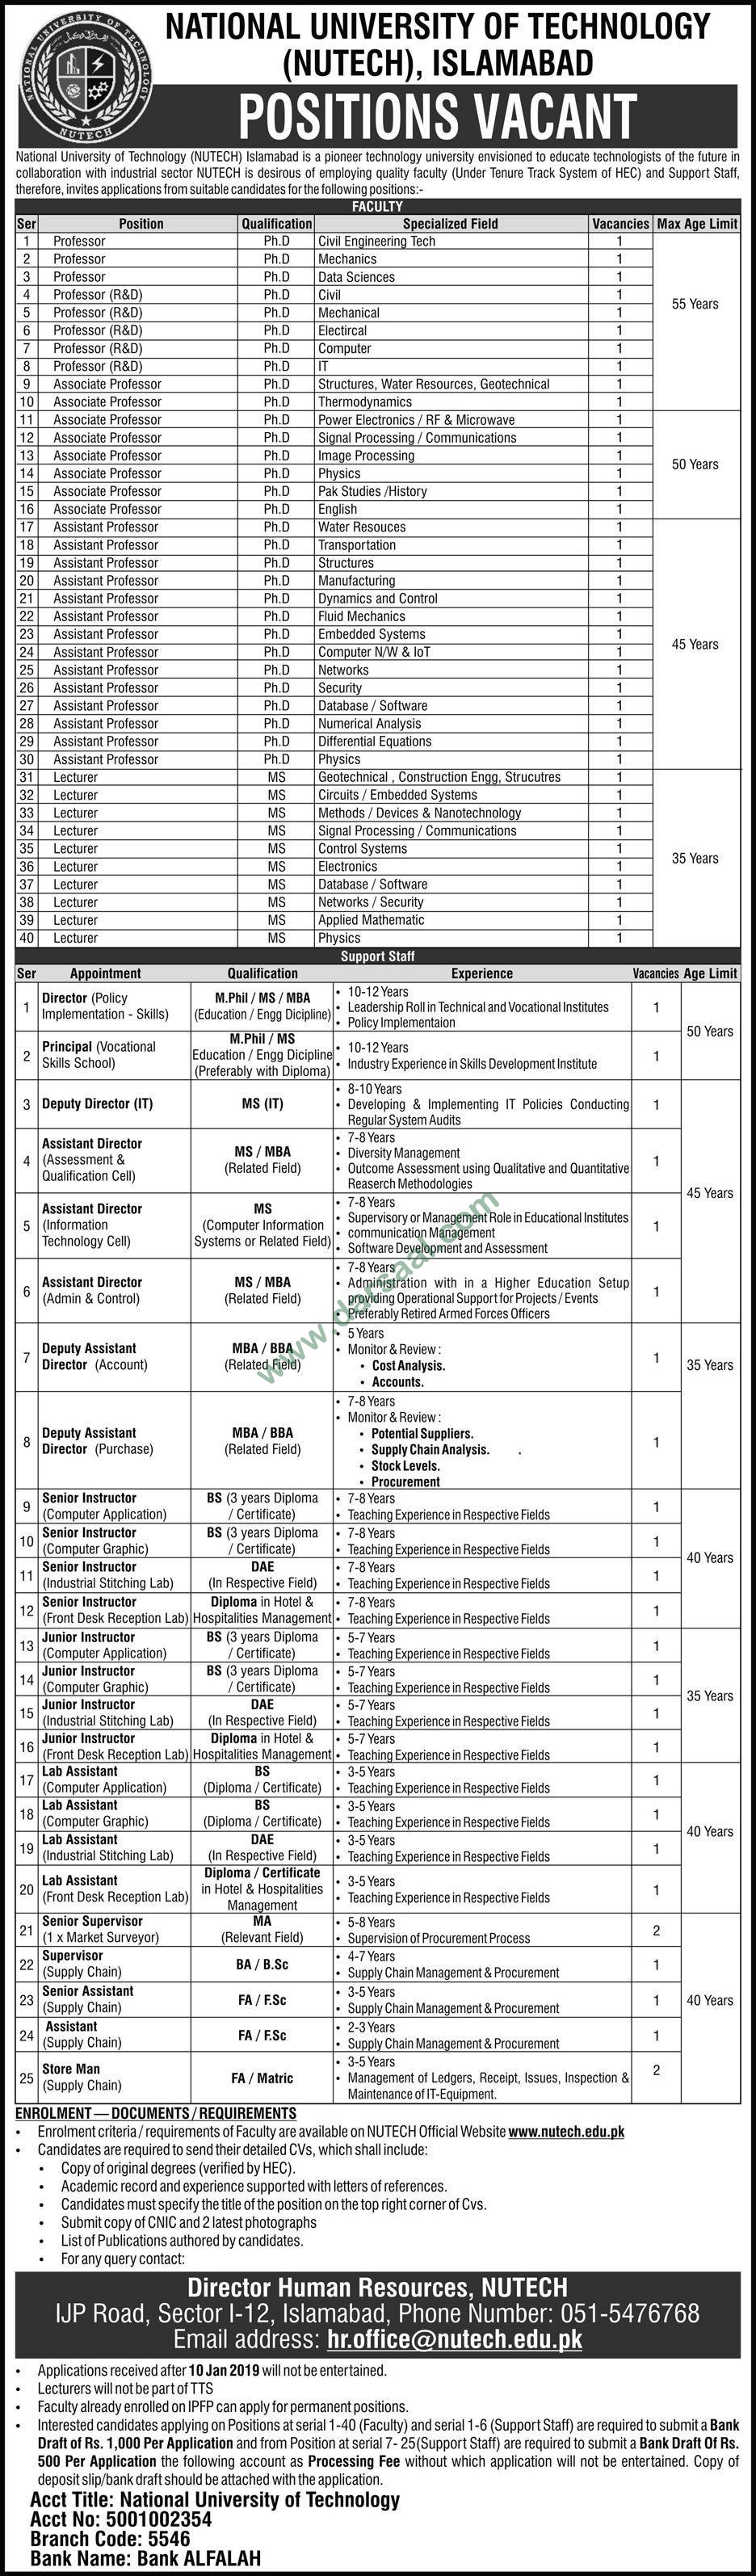 Assistant Professor Jobs in National University of Technology in Islamabad - Dec 24, 2018